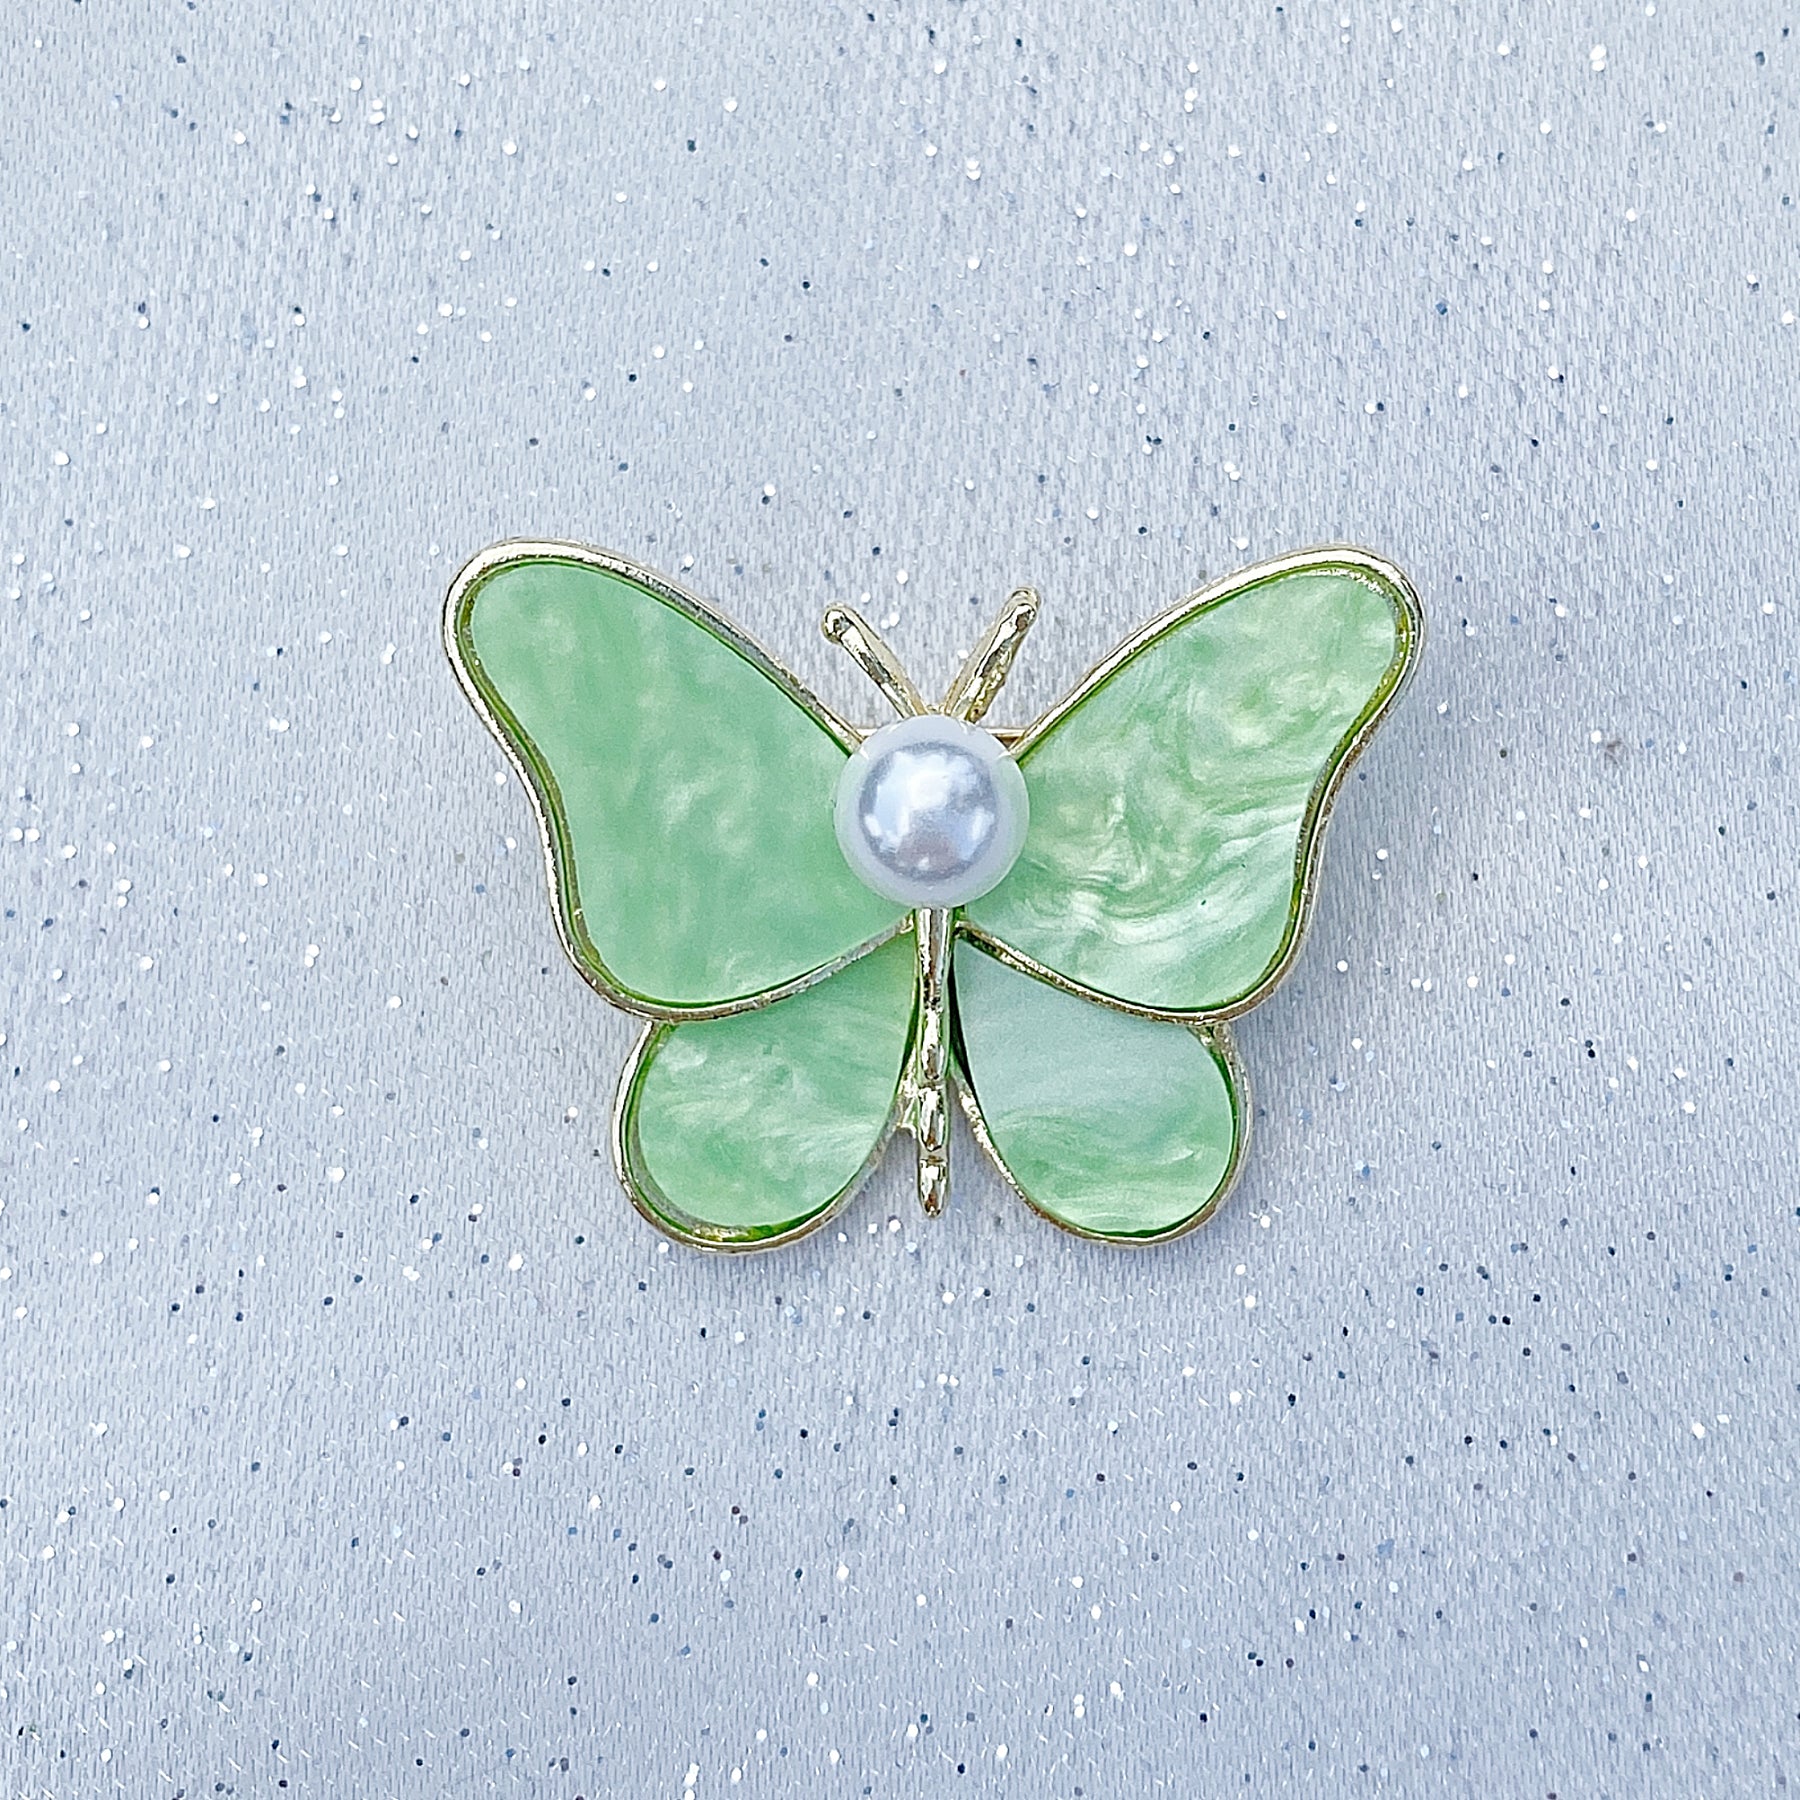 morkopela Green Brooch Pin for Women Girls Butterfly Cupid Insect Vintage Brooch Jewelry Coat